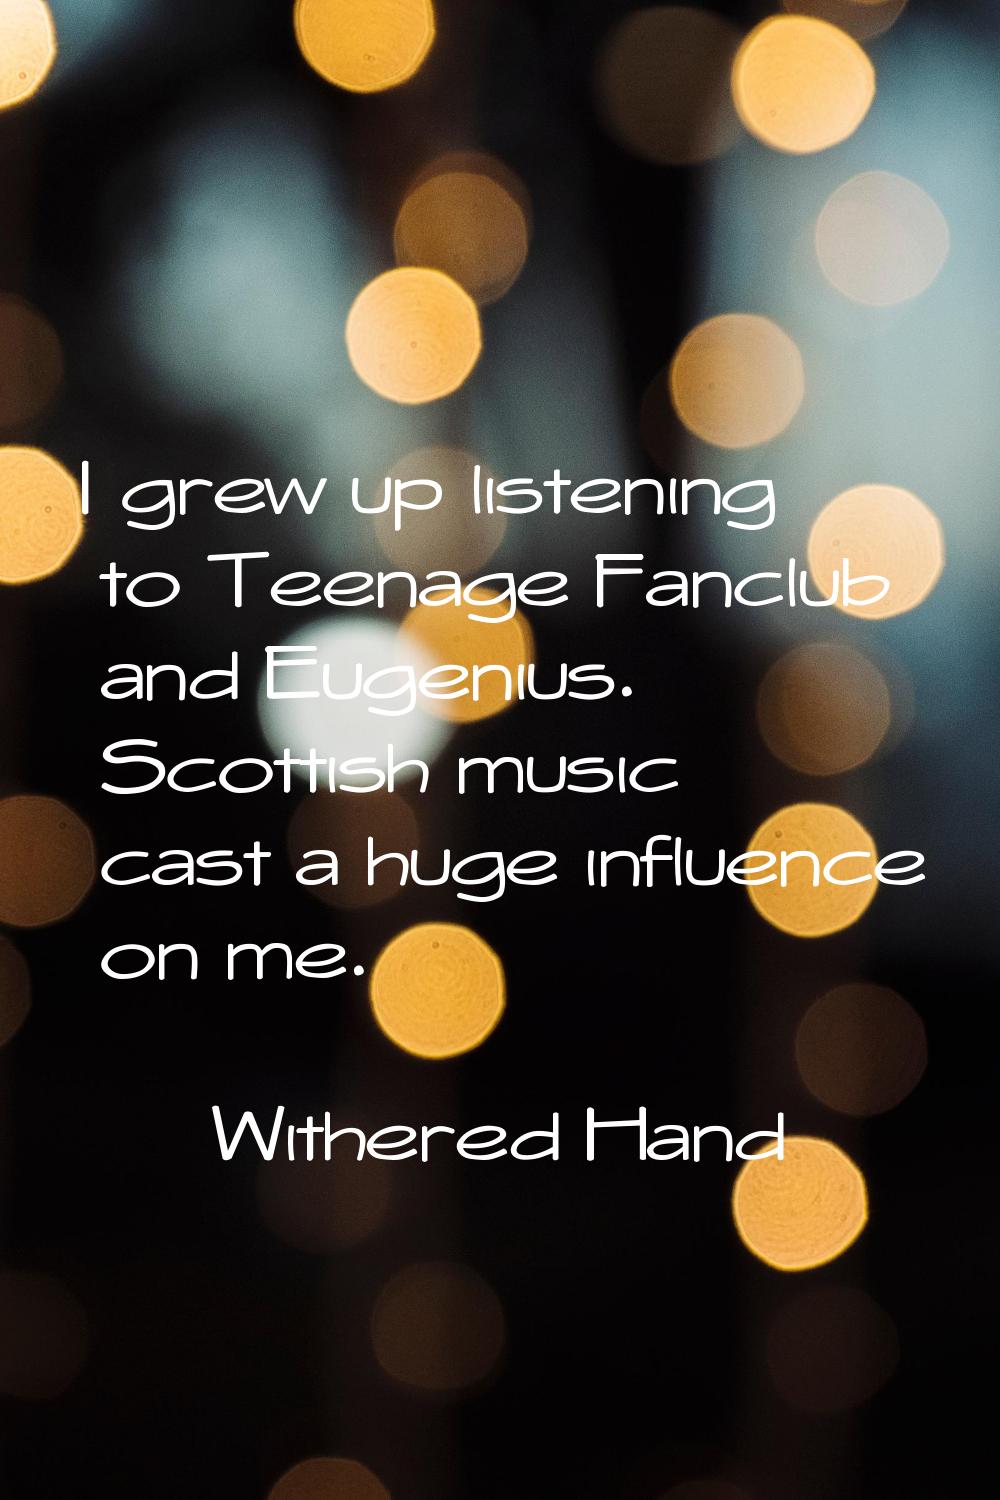 I grew up listening to Teenage Fanclub and Eugenius. Scottish music cast a huge influence on me.